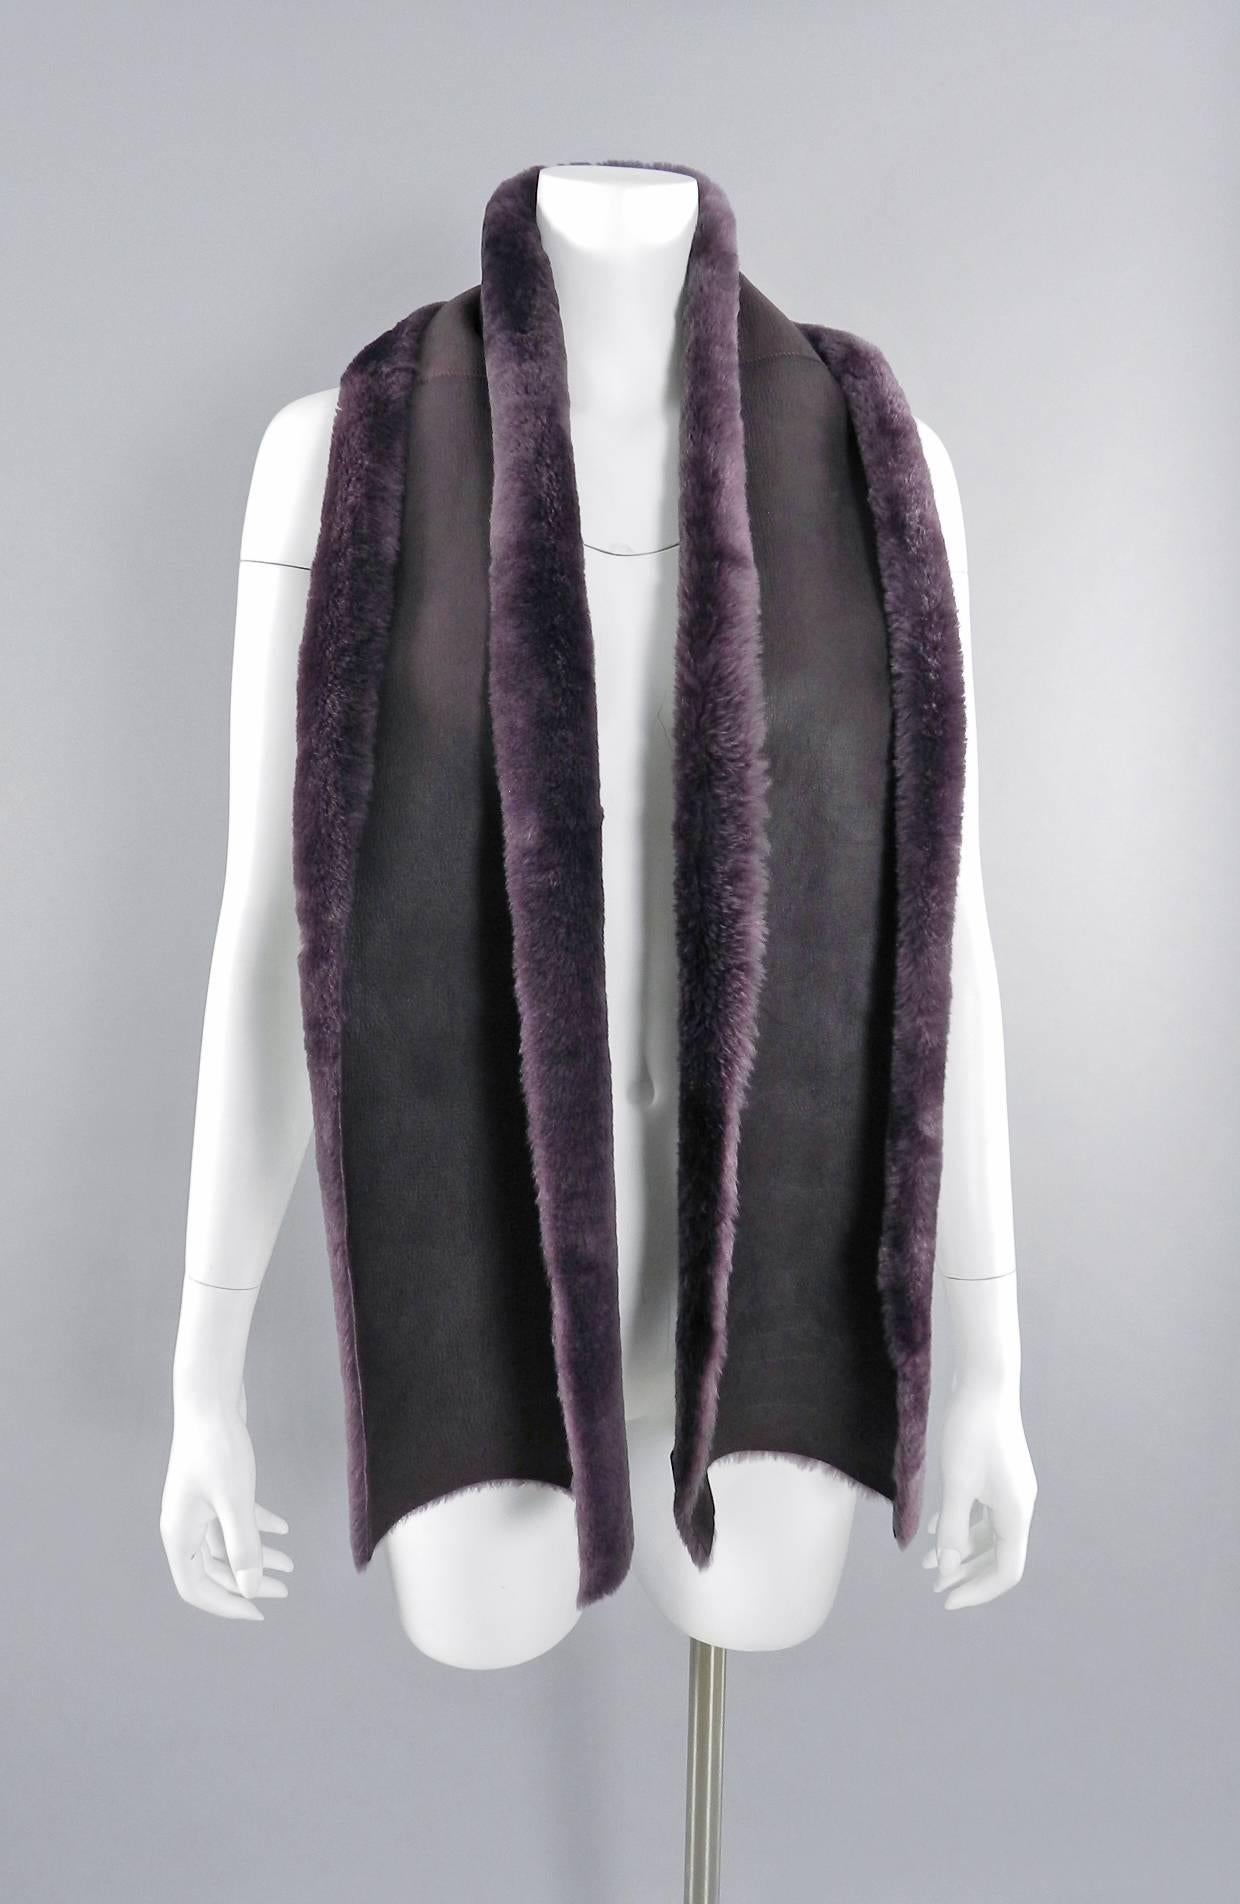 Chanel purple shearling lambskin scarf. Excellent pre-owned condition. Measures 8-10